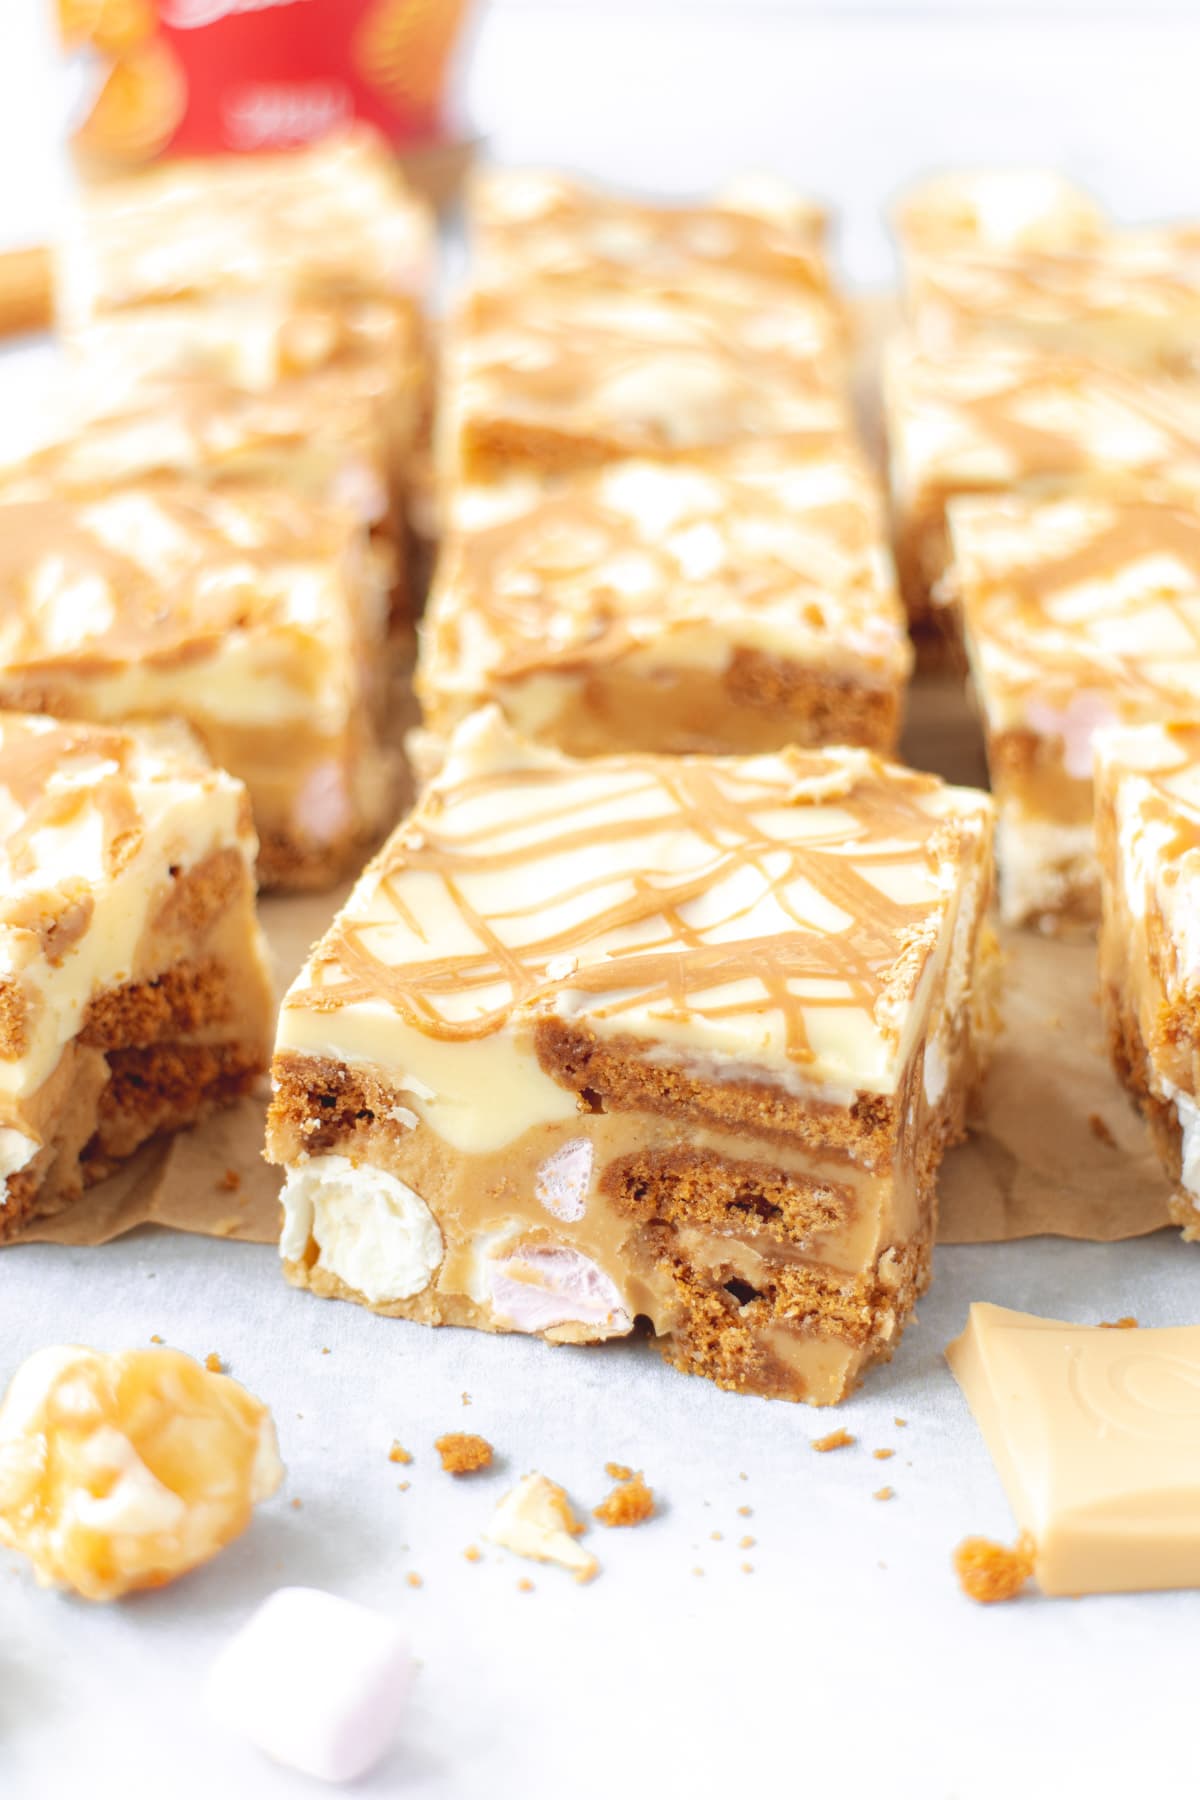 Biscoff cookie layers in a slice of fridge cake